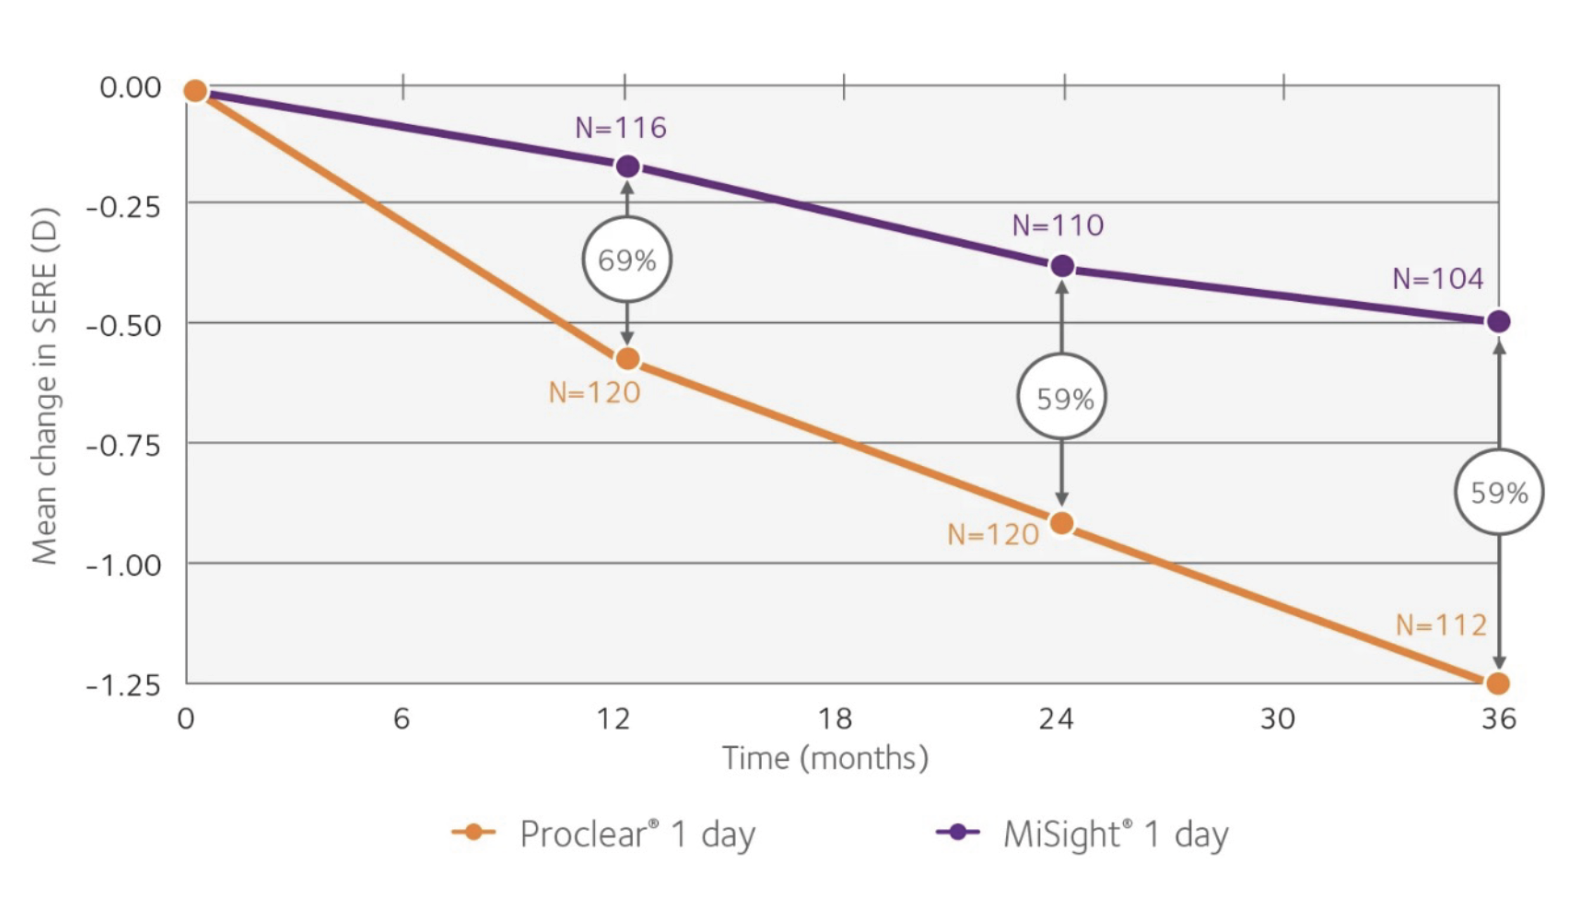 Fig. 6. A study of CooperVision’s MiSight 1 day lenses demonstrated a 59% reduction in myopia progression as well as a 52% reduction in axial length growth over a three-year period.